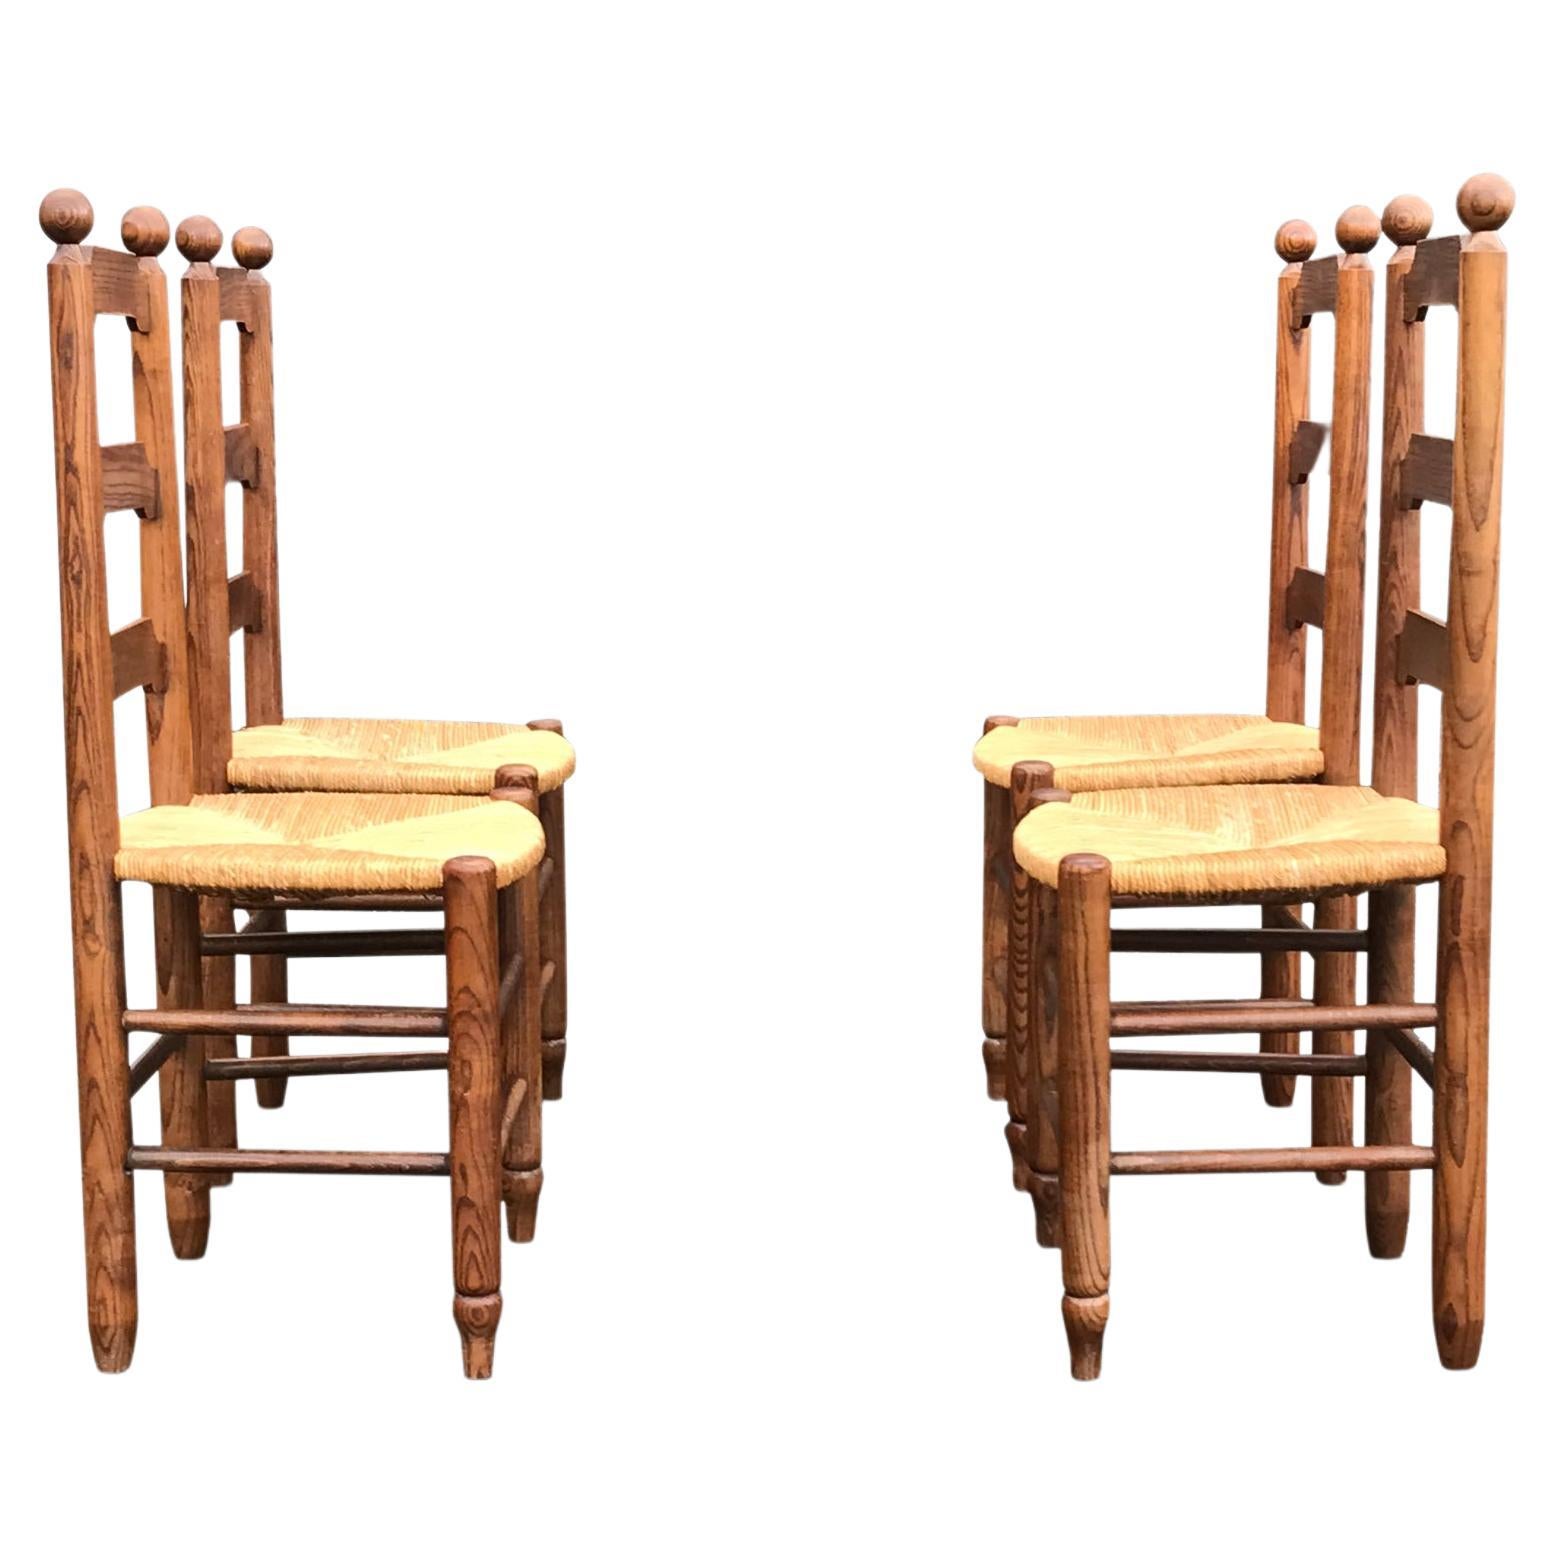 Rustic oak and wicker dining chair Georges Robert France 1960s, set of 4 For Sale